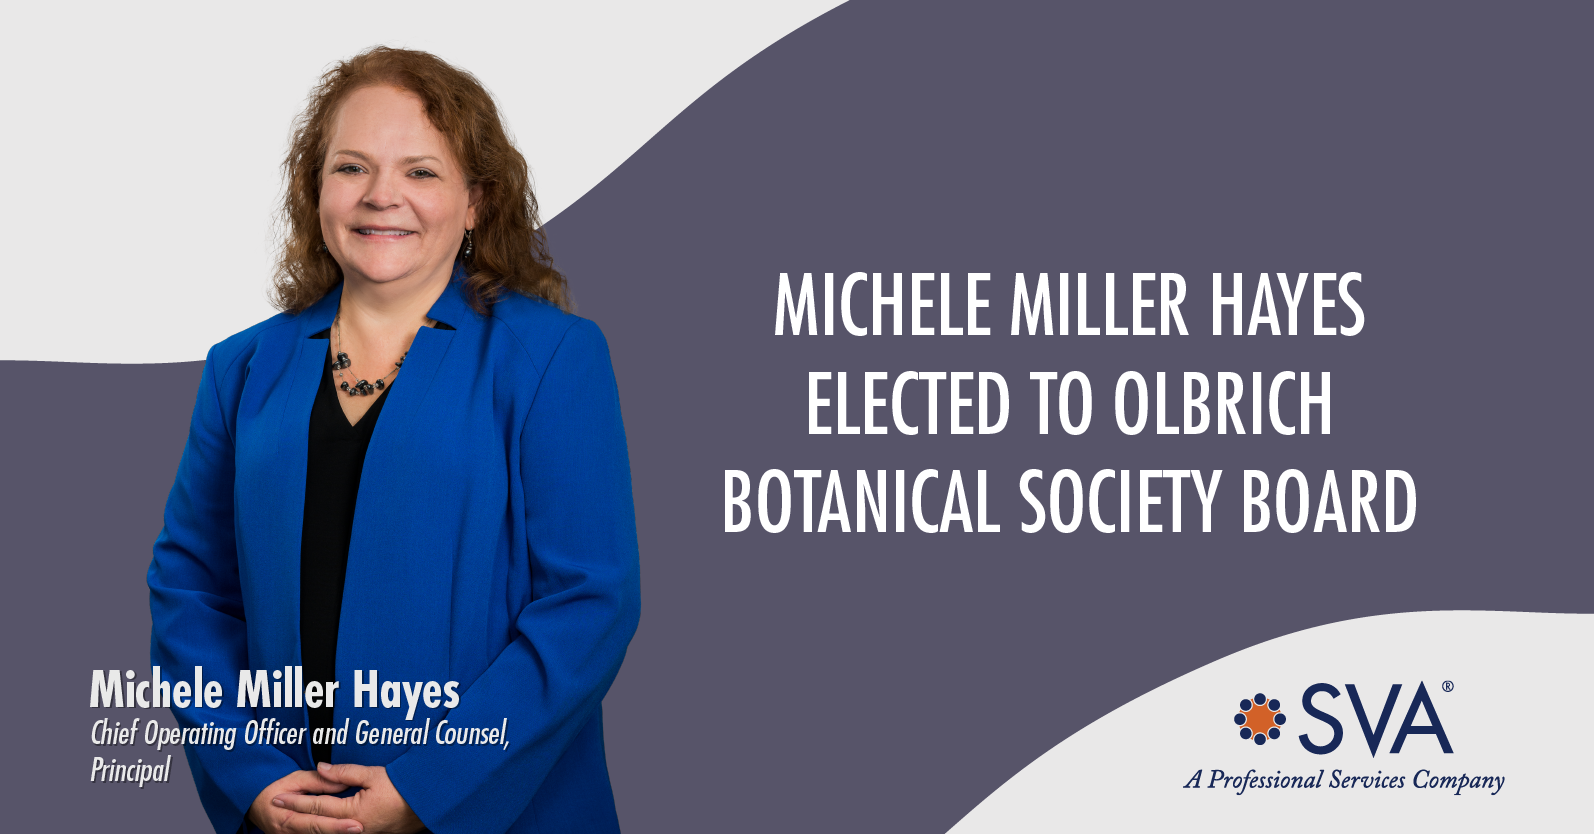 Michele Miller Hayes Elected to Olbrich Botanical Society Board